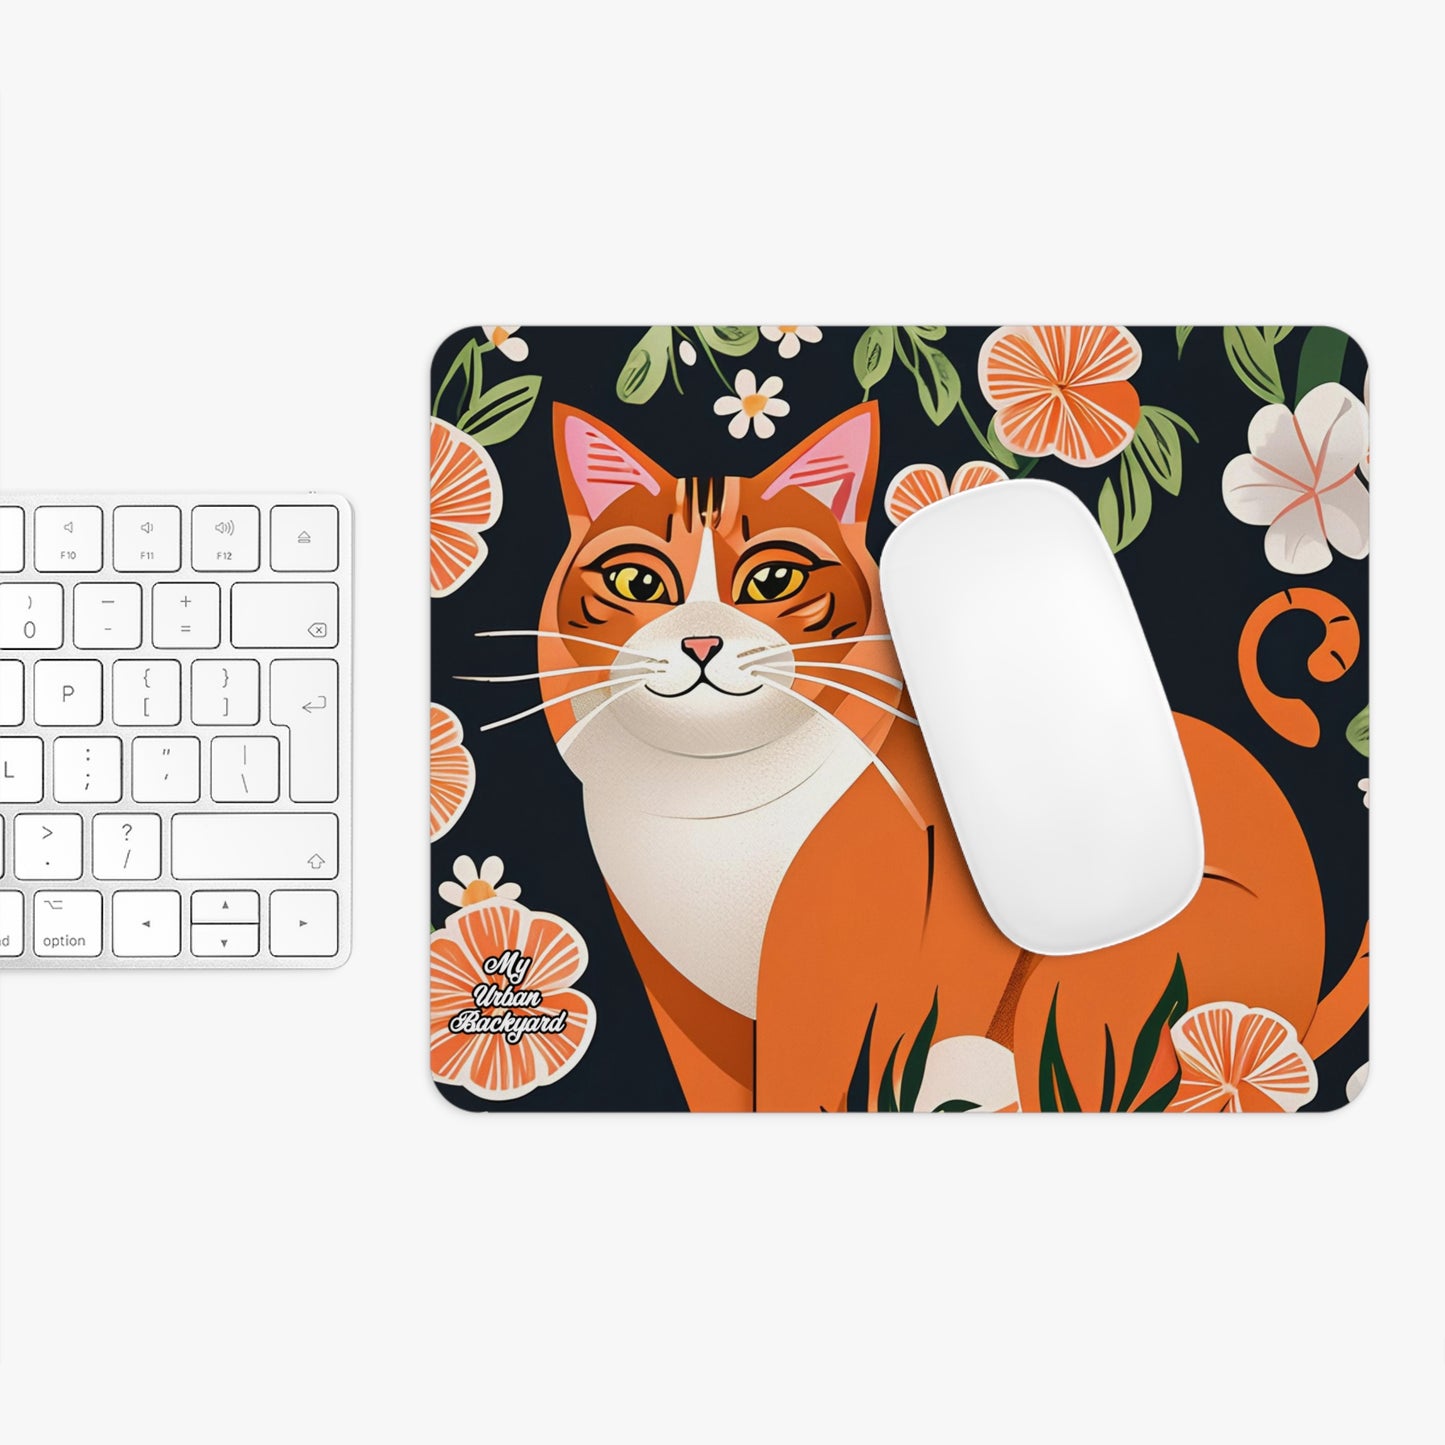 Computer Mouse Pad with Non-slip rubber bottom for Home or Office - Orange Cat with Orange Flowers